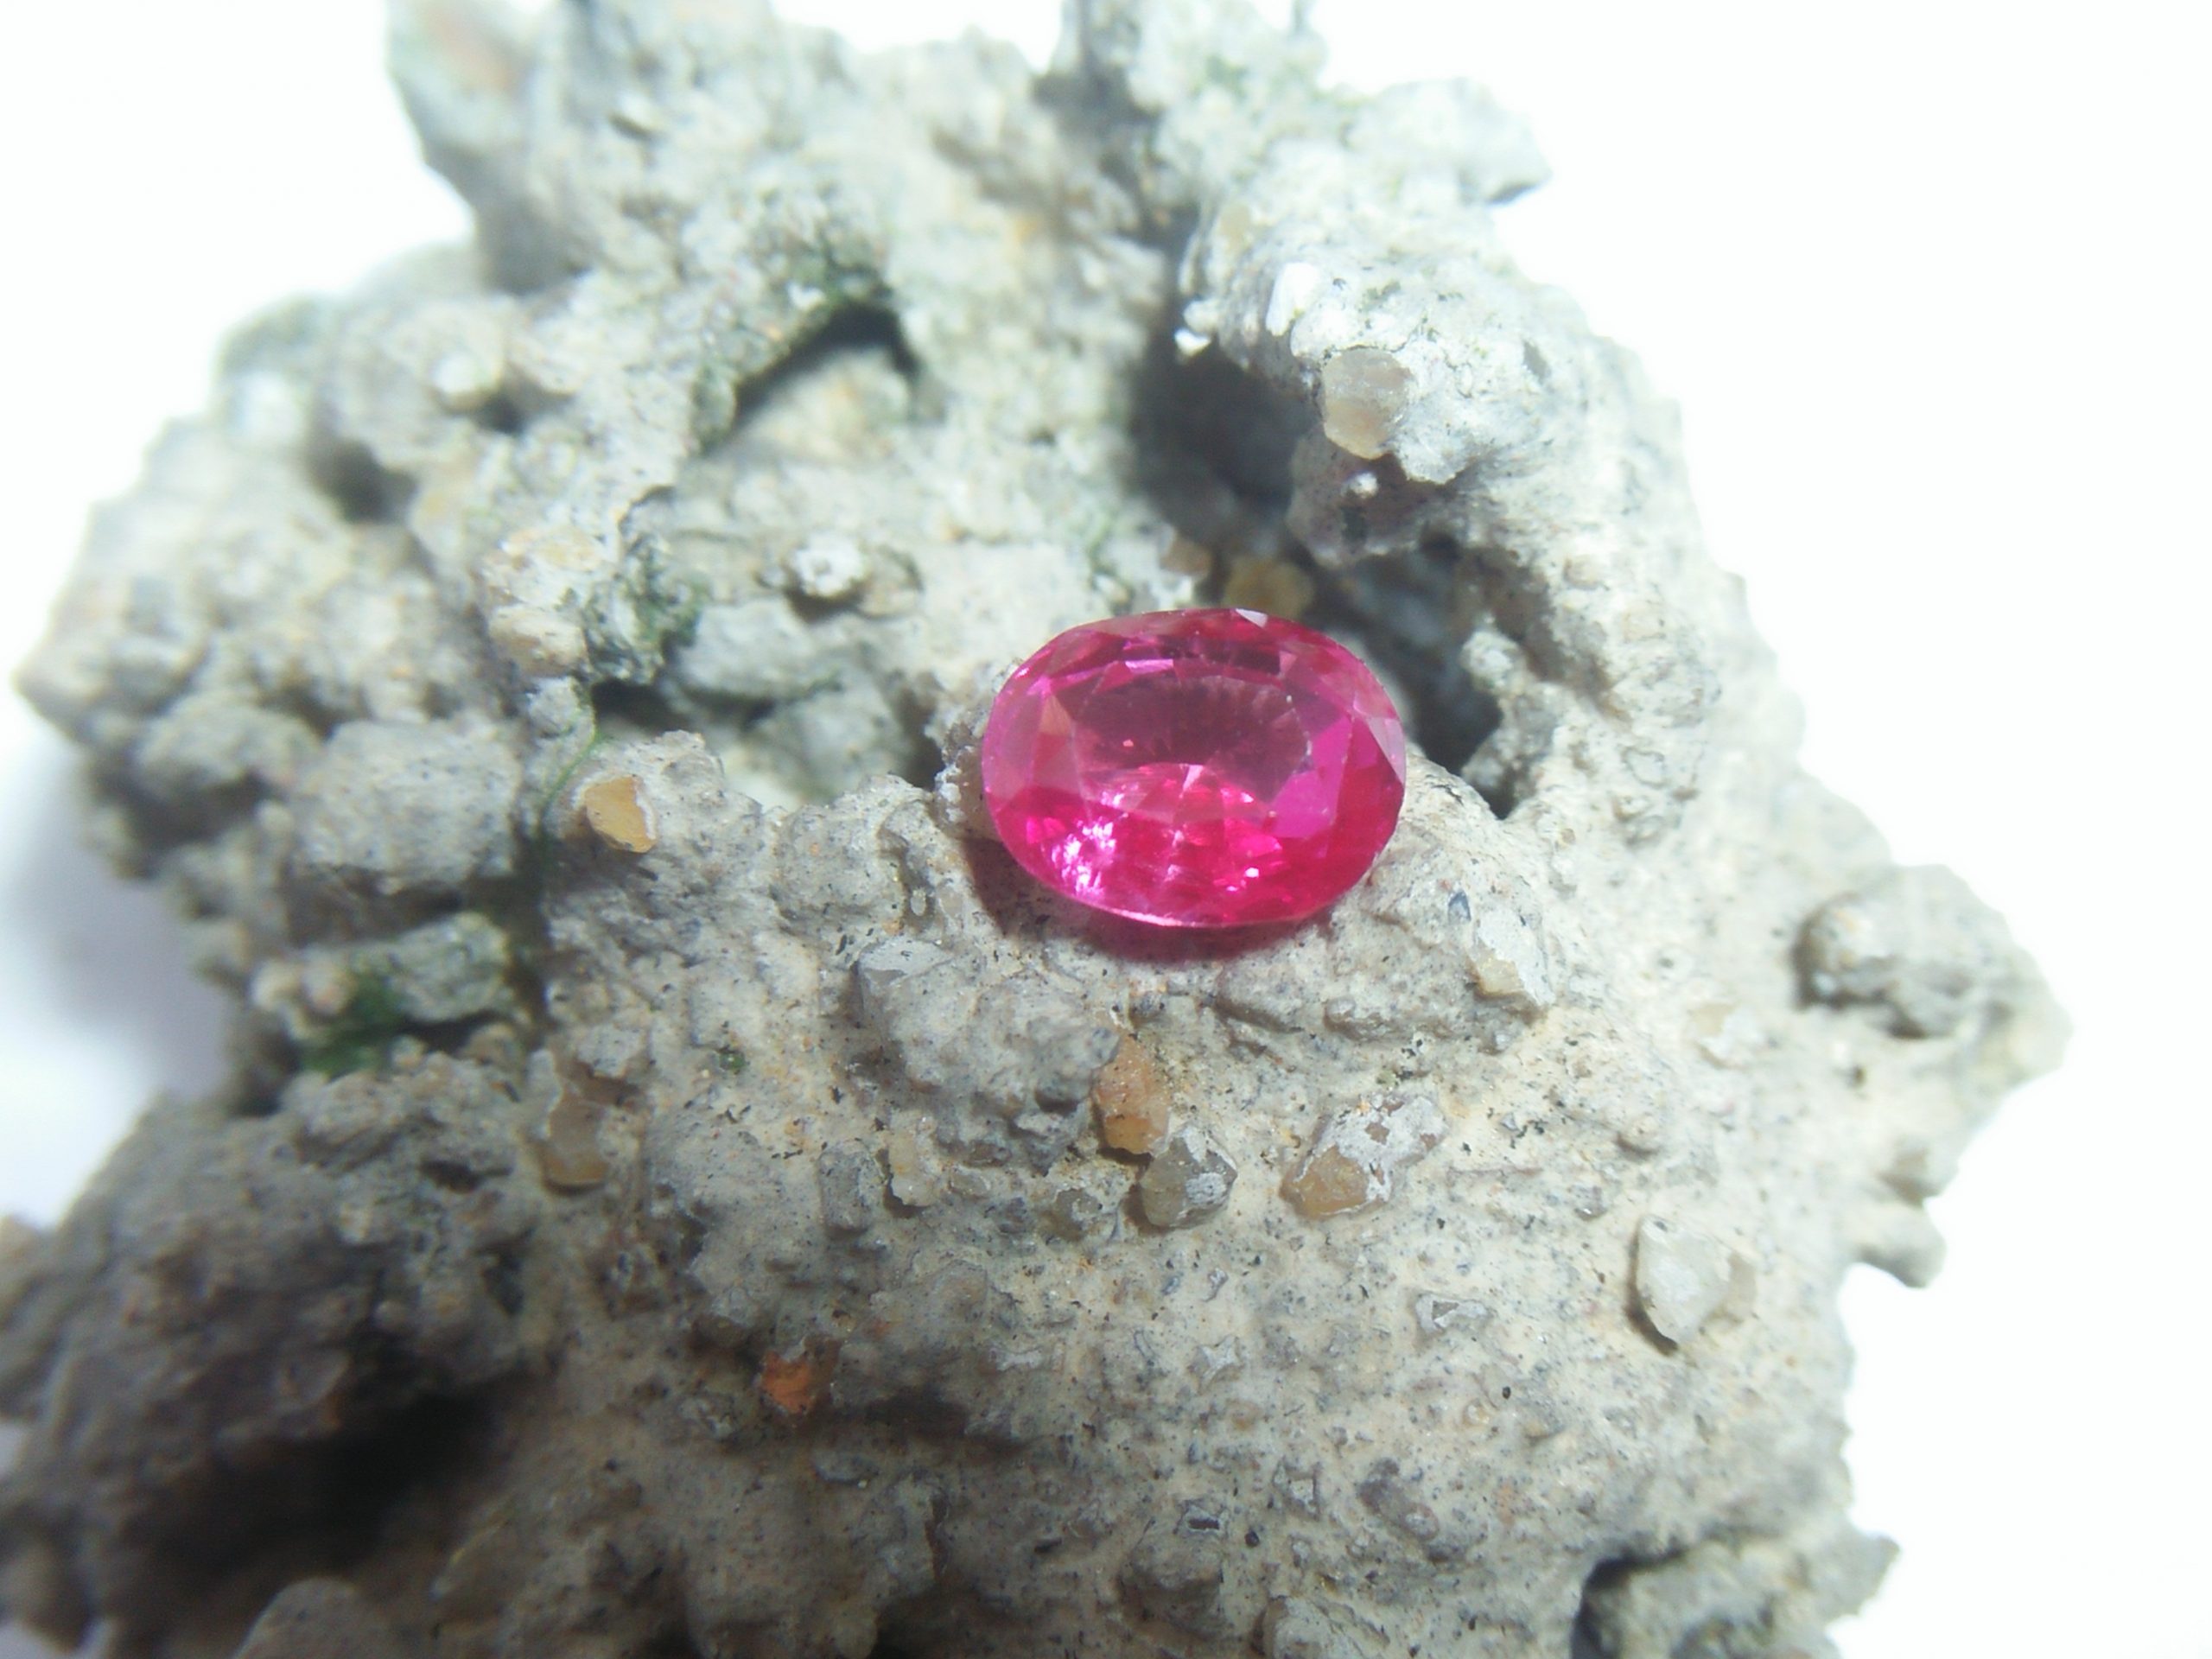 Ceylon NATURAL Pink Sapphire Colour : Hot Pink Shape : Oval Weight : 0.92 Dimension : 6.1 mm x 4.8mm x 3.4 mm Treatment : Heated Clarity : SI • CSL - Colored Stone Laboratory Certified ( GIA Alumina Association Member ) • CSL Memo No : 35E7D3E87864 Sapphire is a precious gemstone, a variety of the mineral corundum, consisting of aluminum oxide with trace amounts of elements such as iron, titanium, chromium, copper, or magnesium. Sapphire deposits are found in Eastern Australia, Thailand, Sri Lanka, China, Vietnam, Madagascar, Greenland, East Africa, and in North America in mostly in Montana. Madagascar, Sri Lanka, and Kashmir produce large quantities of fine quality Sapphires for the world market. Sapphires are mined from alluvial deposits or from primary underground workings. Blue Sapphire and Ruby are the most popular Gemstone in Corundum Family. also, Orangy Pink Sapphire is called Padparadscha. The name Drive's from the Sinhalese word "padmaraga" " පද්මරාග", meaning lotus blossom, as the stone is of a similar color to the lotus blossom. Bi-Color Sapphire from DanuGroup Collection Also, Sapphire can be found as parti-color, bi-color or fancy color. Australia is a main parti-color Sapphire producer. White Sapphire also, White sapphire is a very popular stone to wear instead of Diamond as a 3rd hardness gemstone after diamond ( moissanite hardness is 9.5). Various colors of star sapphires A star sapphire is a type of sapphire that exhibits a star-like phenomenon known as asterism. Also, A rare variety of natural sapphire, known as color-change sapphire, exhibits different colors in a different light. Sapphires can be treated by several methods to enhance and improve their clarity and color. A common method is done by heating the sapphires in furnaces to temperatures between 500 and 1,850 °C for several hours, or by heating in a nitrogen-deficient atmosphere oven for 1 week or more. Geuda is a form of the mineral corundum. Geuda is found primarily in Sri Lanka. It's a semitransparent and milky appearance due to rutile inclusions. Geuda is used to improve its color by heat treatment. Some geuda varieties turn to a blue color after heat treatments and some turn to red after oxidizing. Also, Kowangu pushparaga turns to yellow sapphire after oxidizing. Sapphire Crystal system is a Trigonal crystal system with a hexagonal scalenohedral crystal class. Sapphire hardness is 9 according to the Mohs hardness scale with 4.0~4.1 specific gravity. Refractive index ω          =1.768–1.772 nε =1.760–1.763 Solubility = Insoluble Melting point = 2,030–2,050 °C Birefringence  = 0.008 Pleochroism = Strong Luster = Vitreous Sapphire is the birthstone for September and the gem of the 45th anniversary. Healing Properties of Sapphire Sapphire releases mental tension, depression, unwanted thoughts, and spiritual confusion.  Sapphire is known as a "stone of Wisdom". It is exceptional for calming and focusing the mind, allowing the release of mental tension and unwanted thoughts. Sapphire is also the best stone for awakening chakras. Dark Blue or Indigo Sapphire stimulates the Third Eye chakra. Blue Sapphire stimulates the Throat Chakra. Green sapphire stimulates Heart Chakra. Black Sapphire stimulates Base Chakra. White sapphire stimulates Crown Chakra. Yellow sapphire stimulates Solar Plexus Chakra. Pink Sapphire Healings It is believed that pink sapphires used for therapeutic purposes as crystals might nourish the emotional well-being of the person wearing the jewelry crafted from the gems. The theory behind these therapeutic beliefs centers on clearing emotional blockages from the past to release hurtful experiences. • Nourishing the Emotional Body with the PinkColor Ray • Energetic Columns of Support • Longevity and Extending the Lifespan of Your Cells • Astral Vision and Sensitivity to Energy